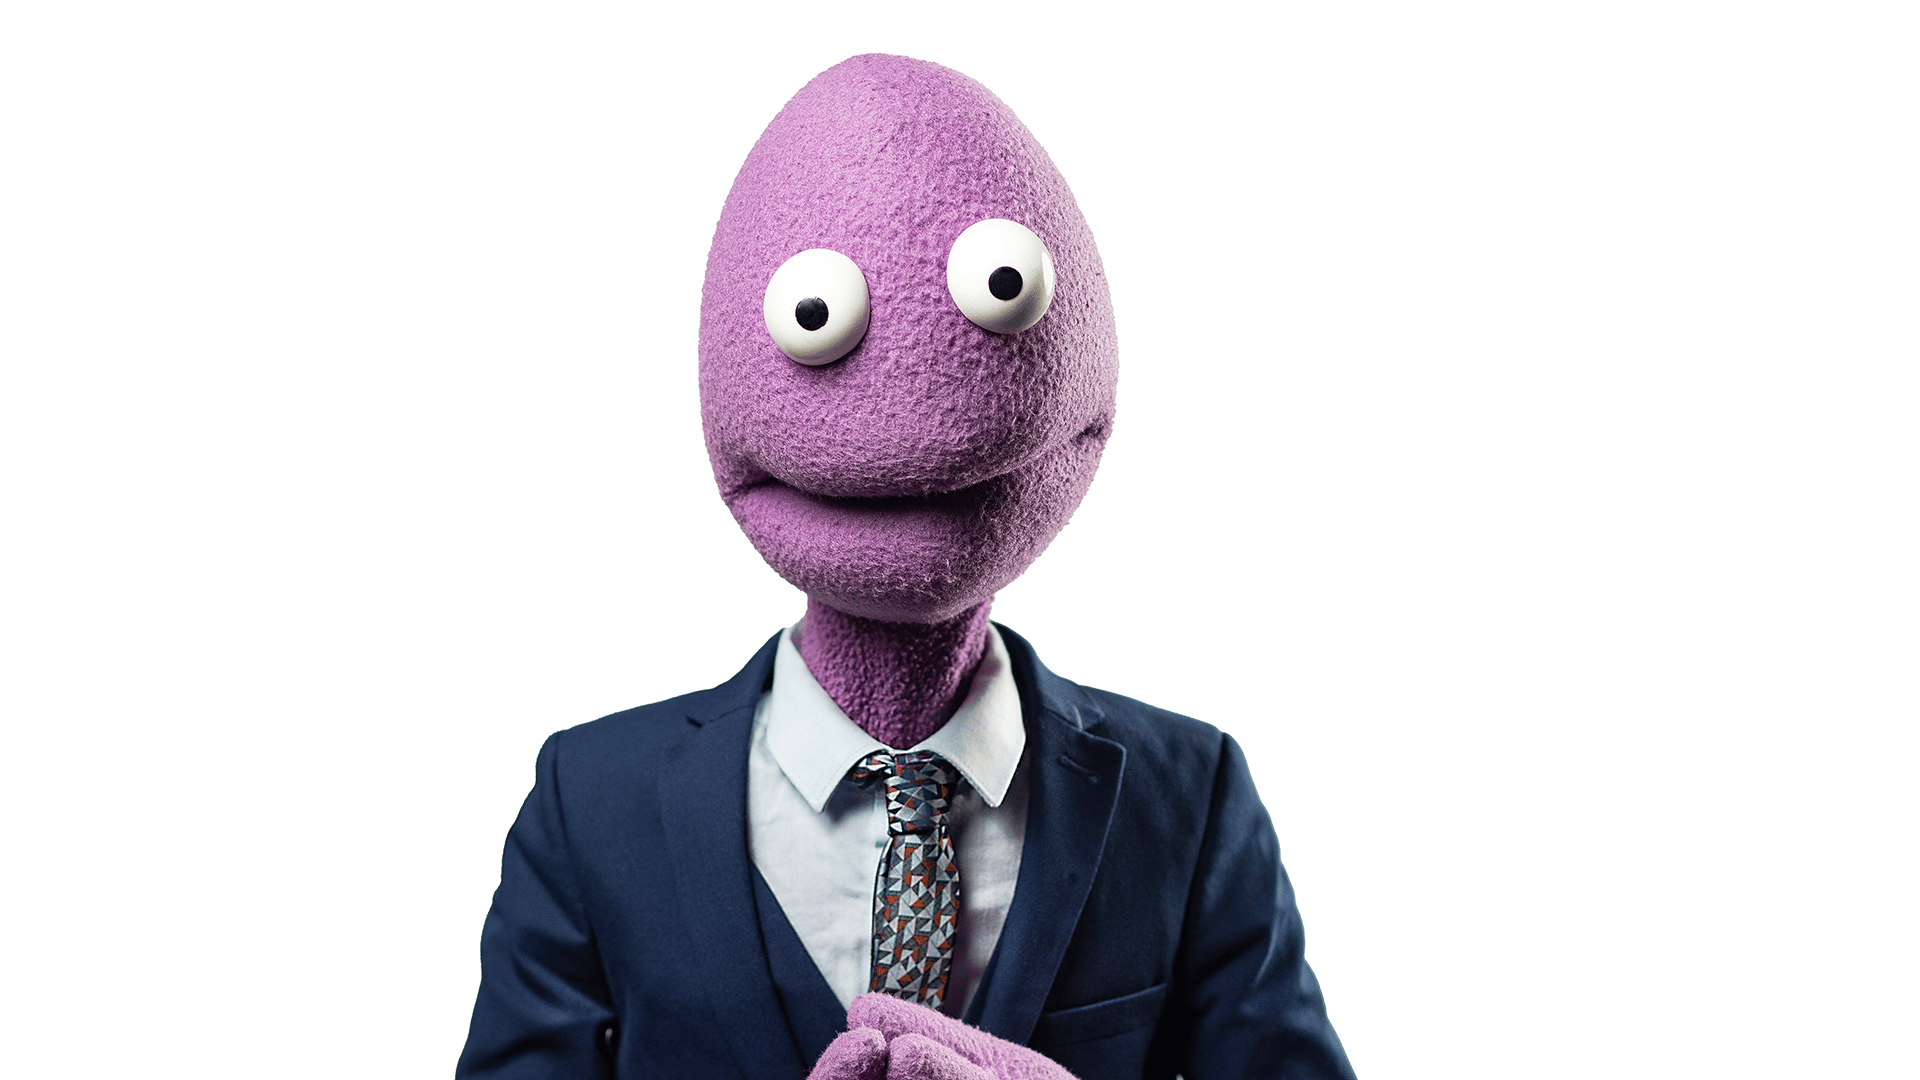 Background: White. Foreground: Randy Feltface, a purple felt puppet wearing a navy suit and white shirt, with their hands clasped together.